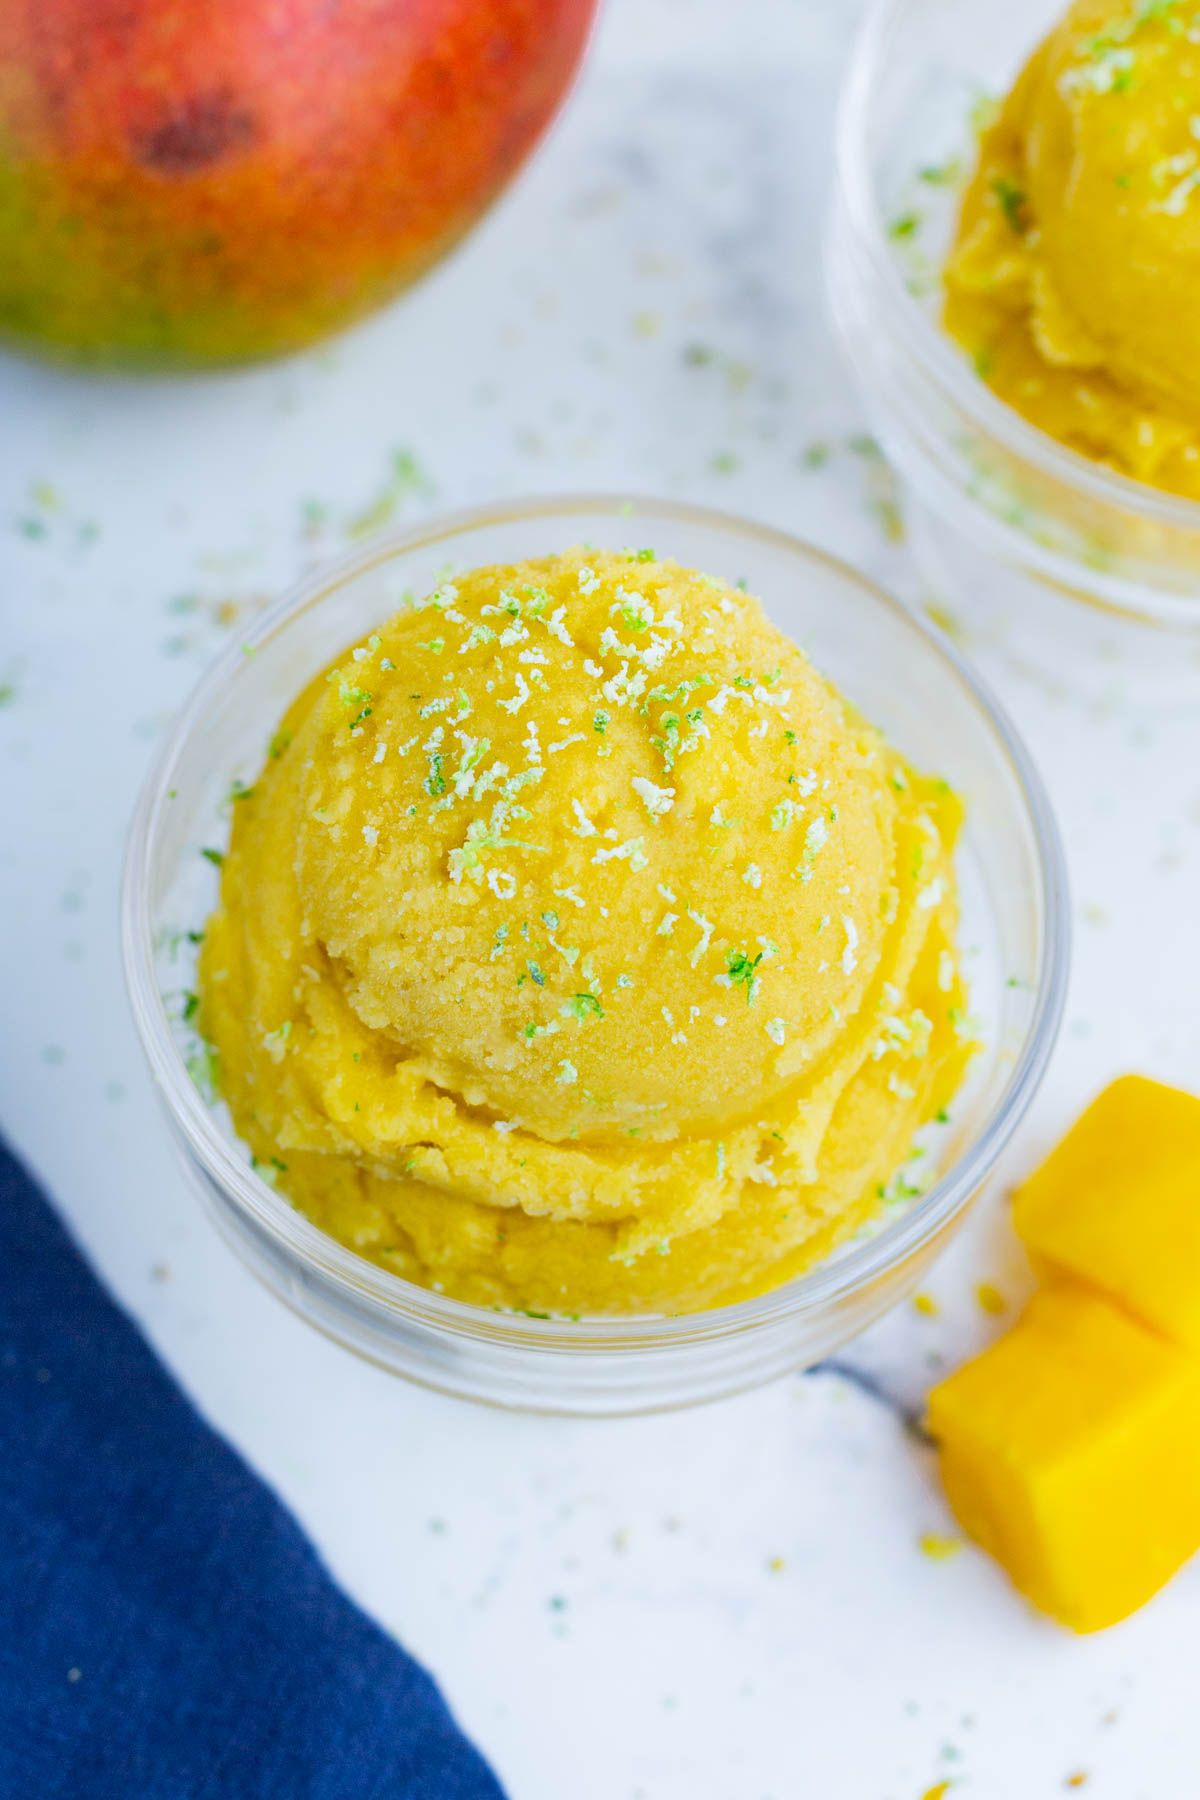 Mango sorbet is creamy and smooth.